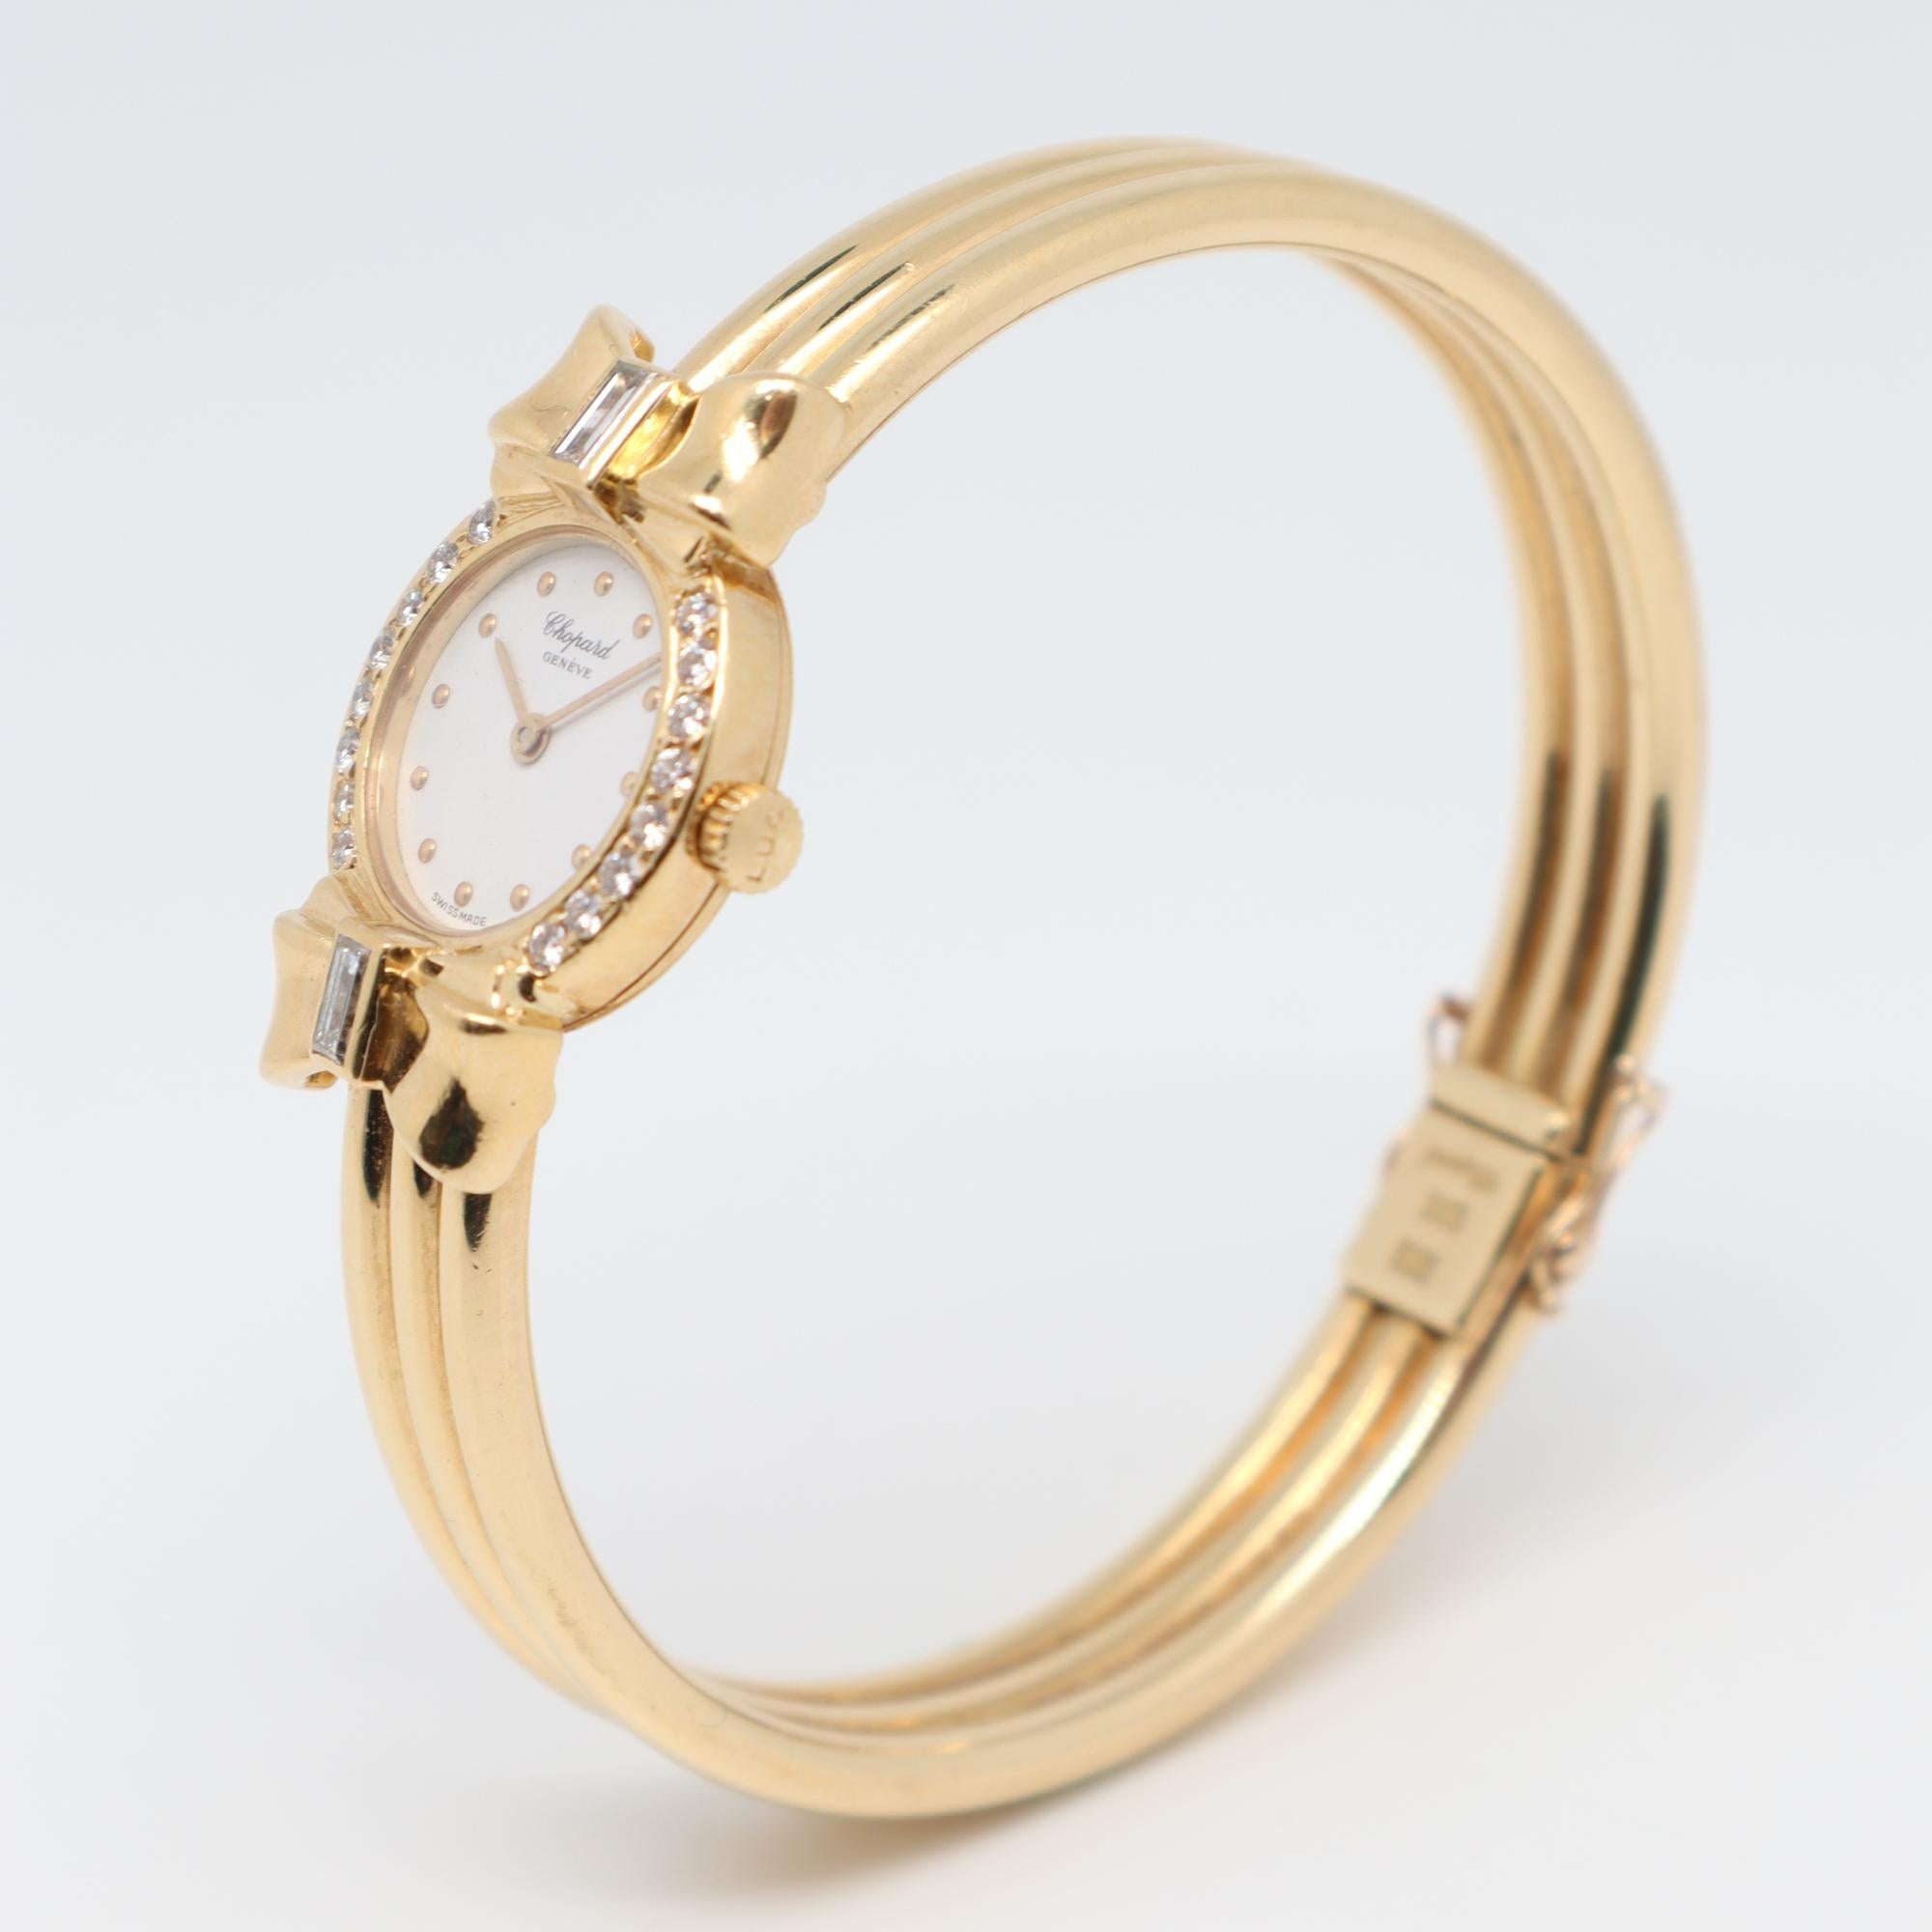 This pre-owned mint condition Chopard 10/5440 is a beautiful Ladies timepiece that is powered by a quartz movement which is cased in a yellow gold case. It has a round shape face, no features dial and has hand dots style markers. It is completed